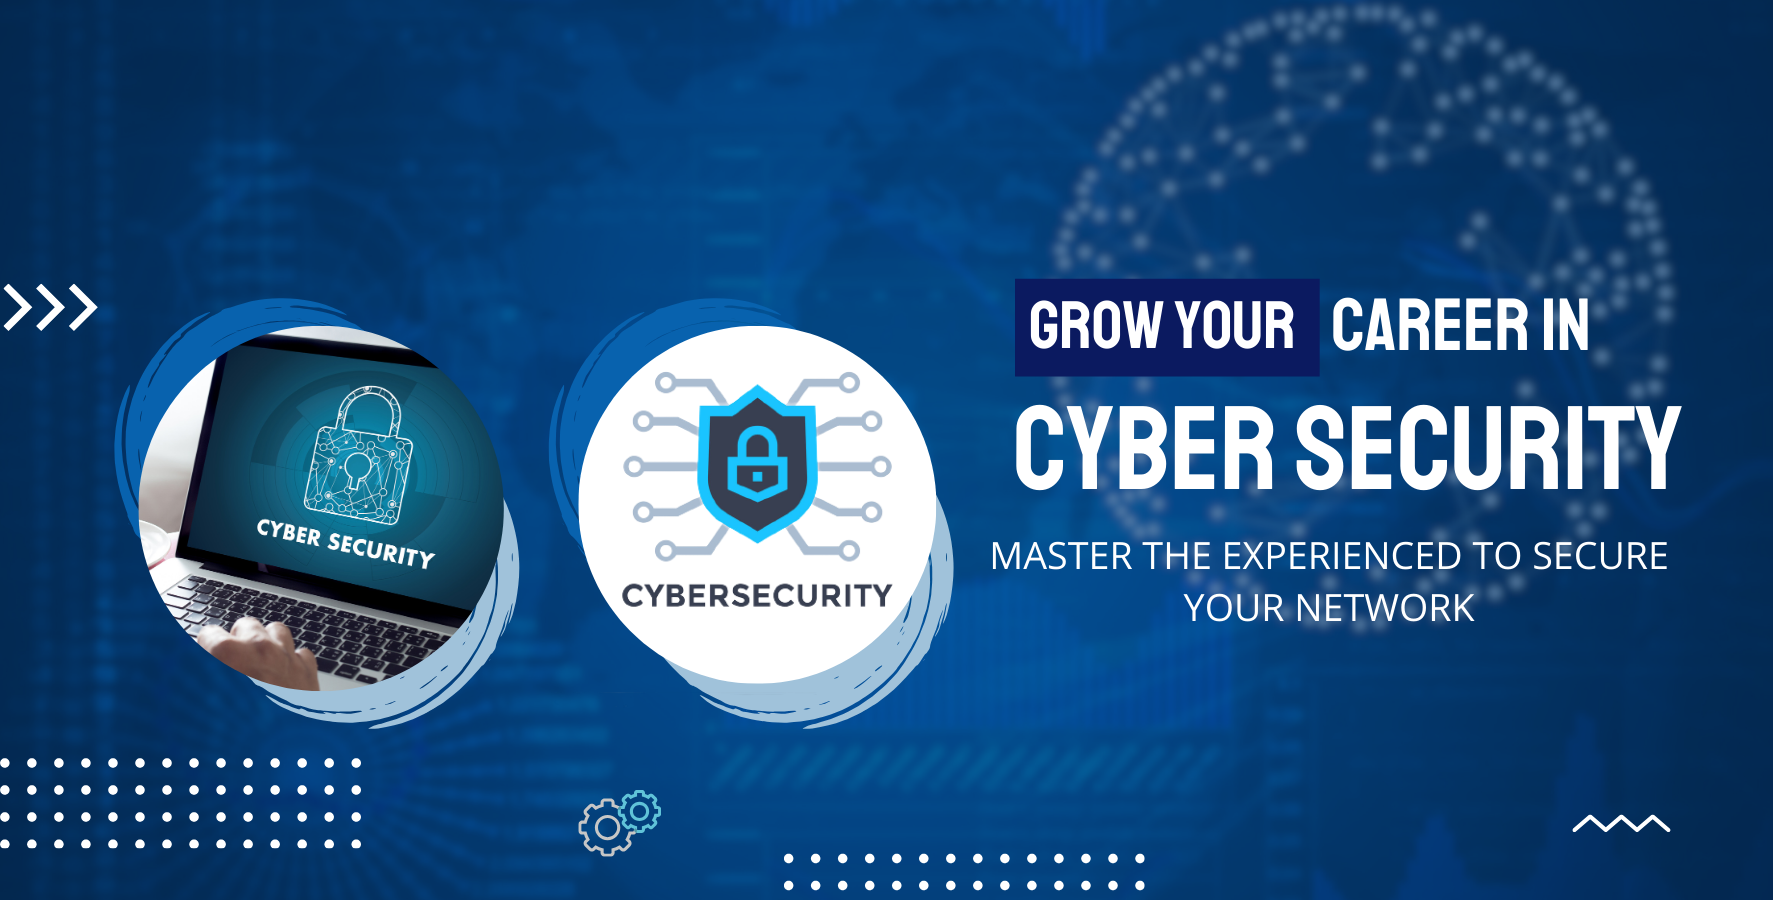 CYBER SECURITY TRAINING COURSE